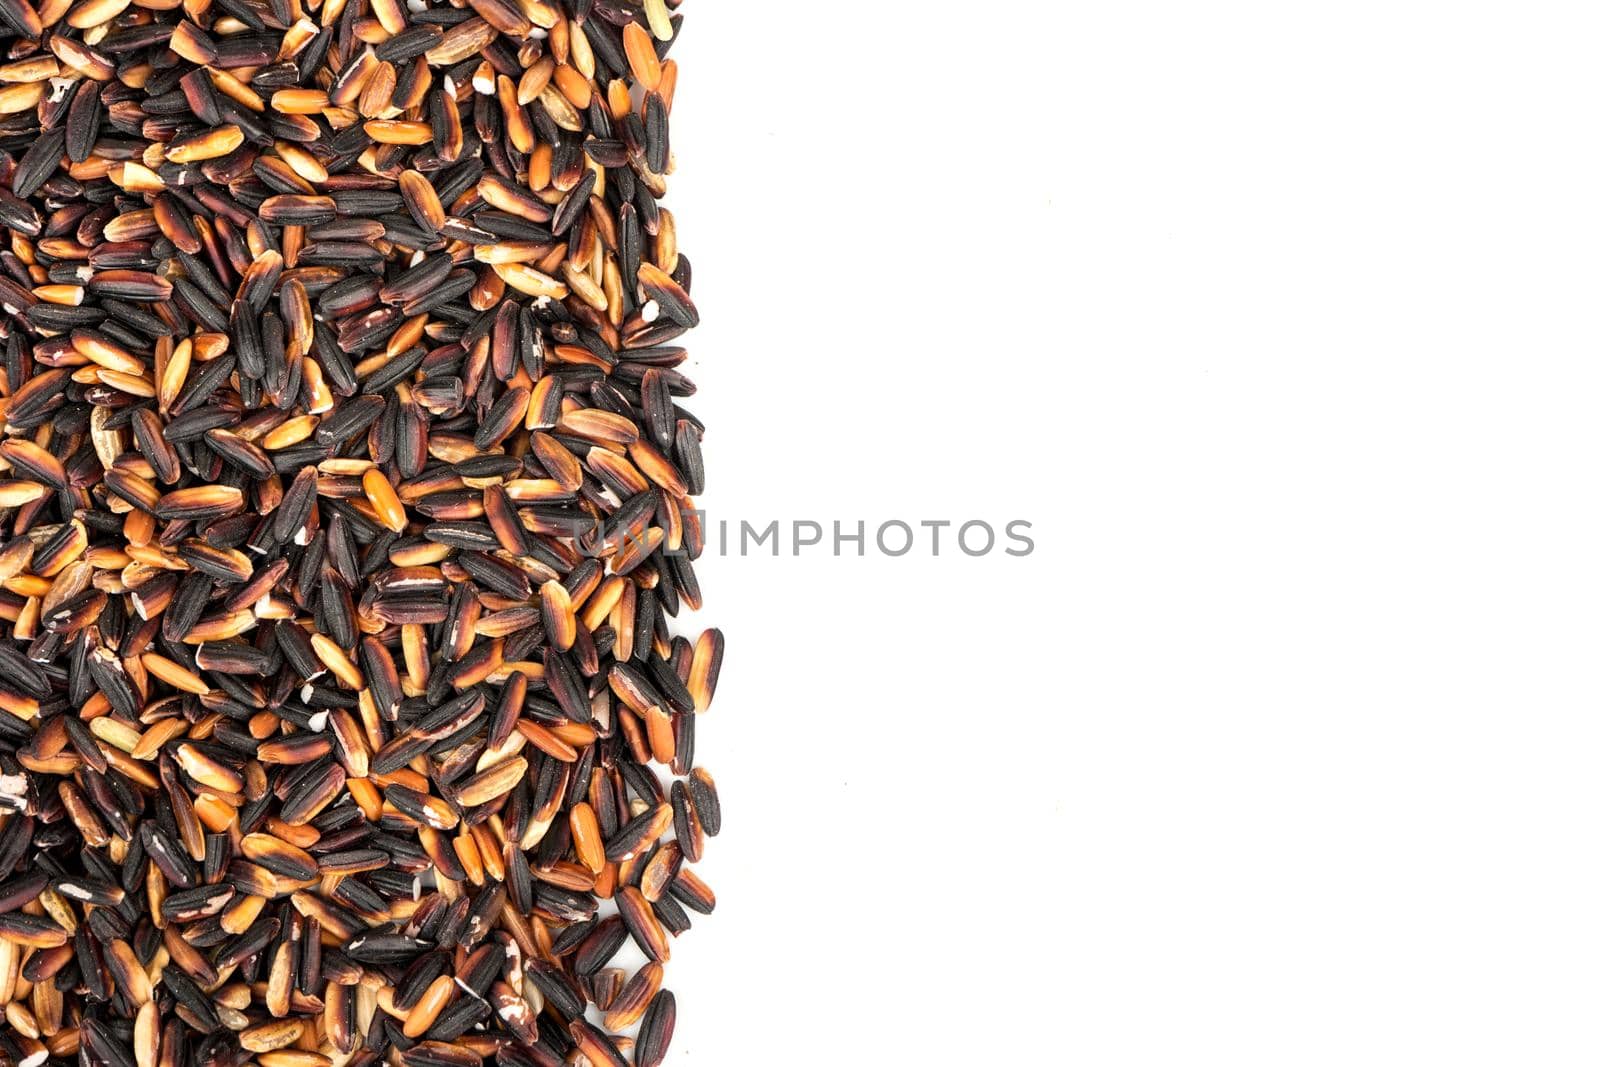 Black wild rice by andregric